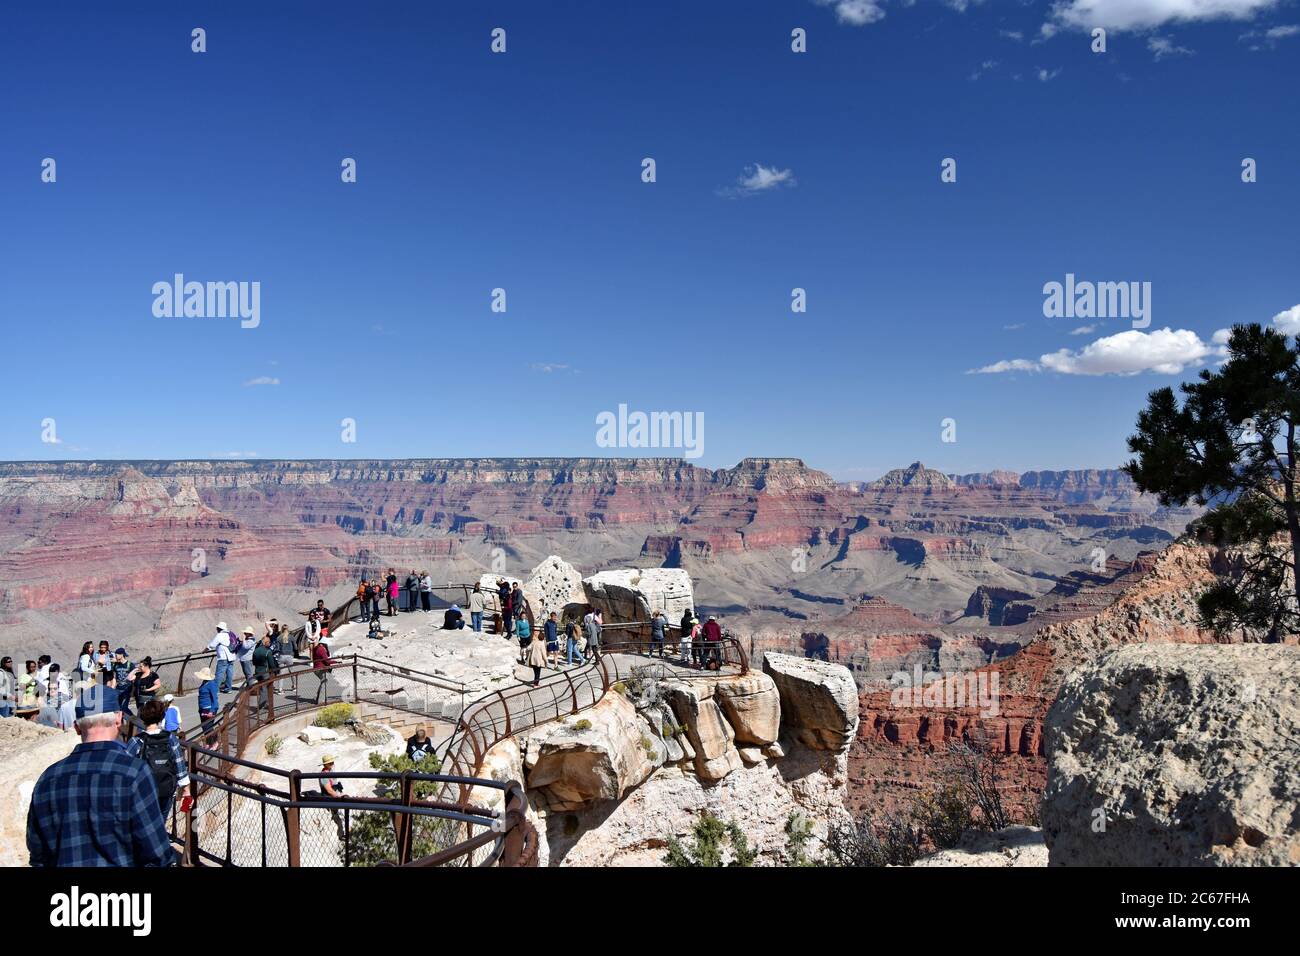 Mather Point on the south rim of the Grand Canyon.  Visitors are seen enjoying the views, posing and taking photos of the canyon around them. Stock Photo